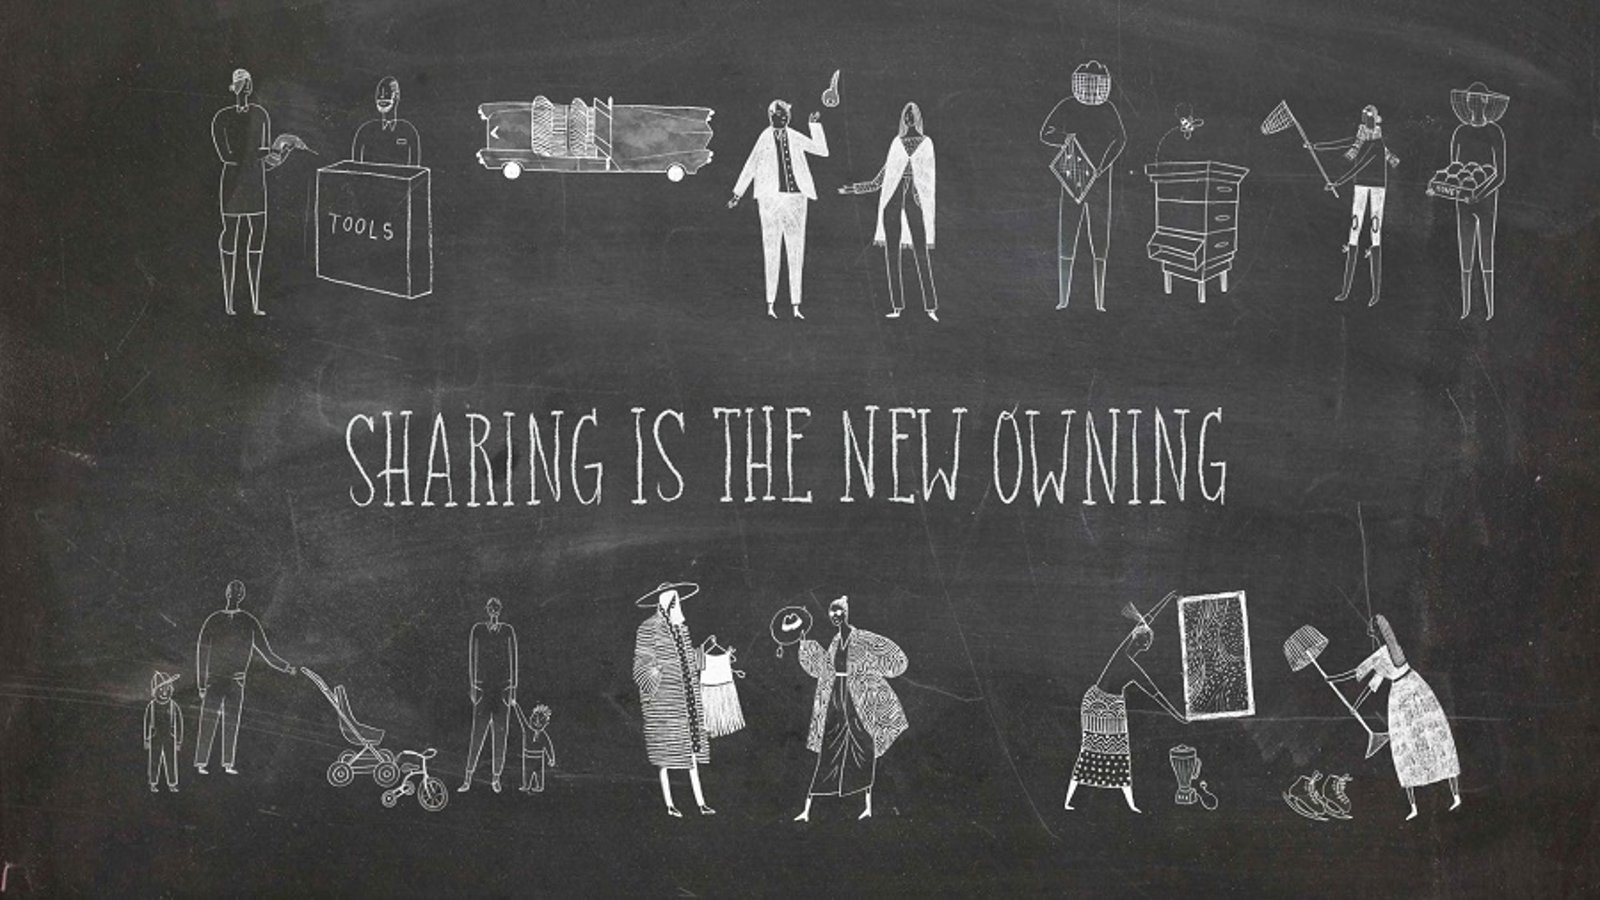 Sharing is the New Owning